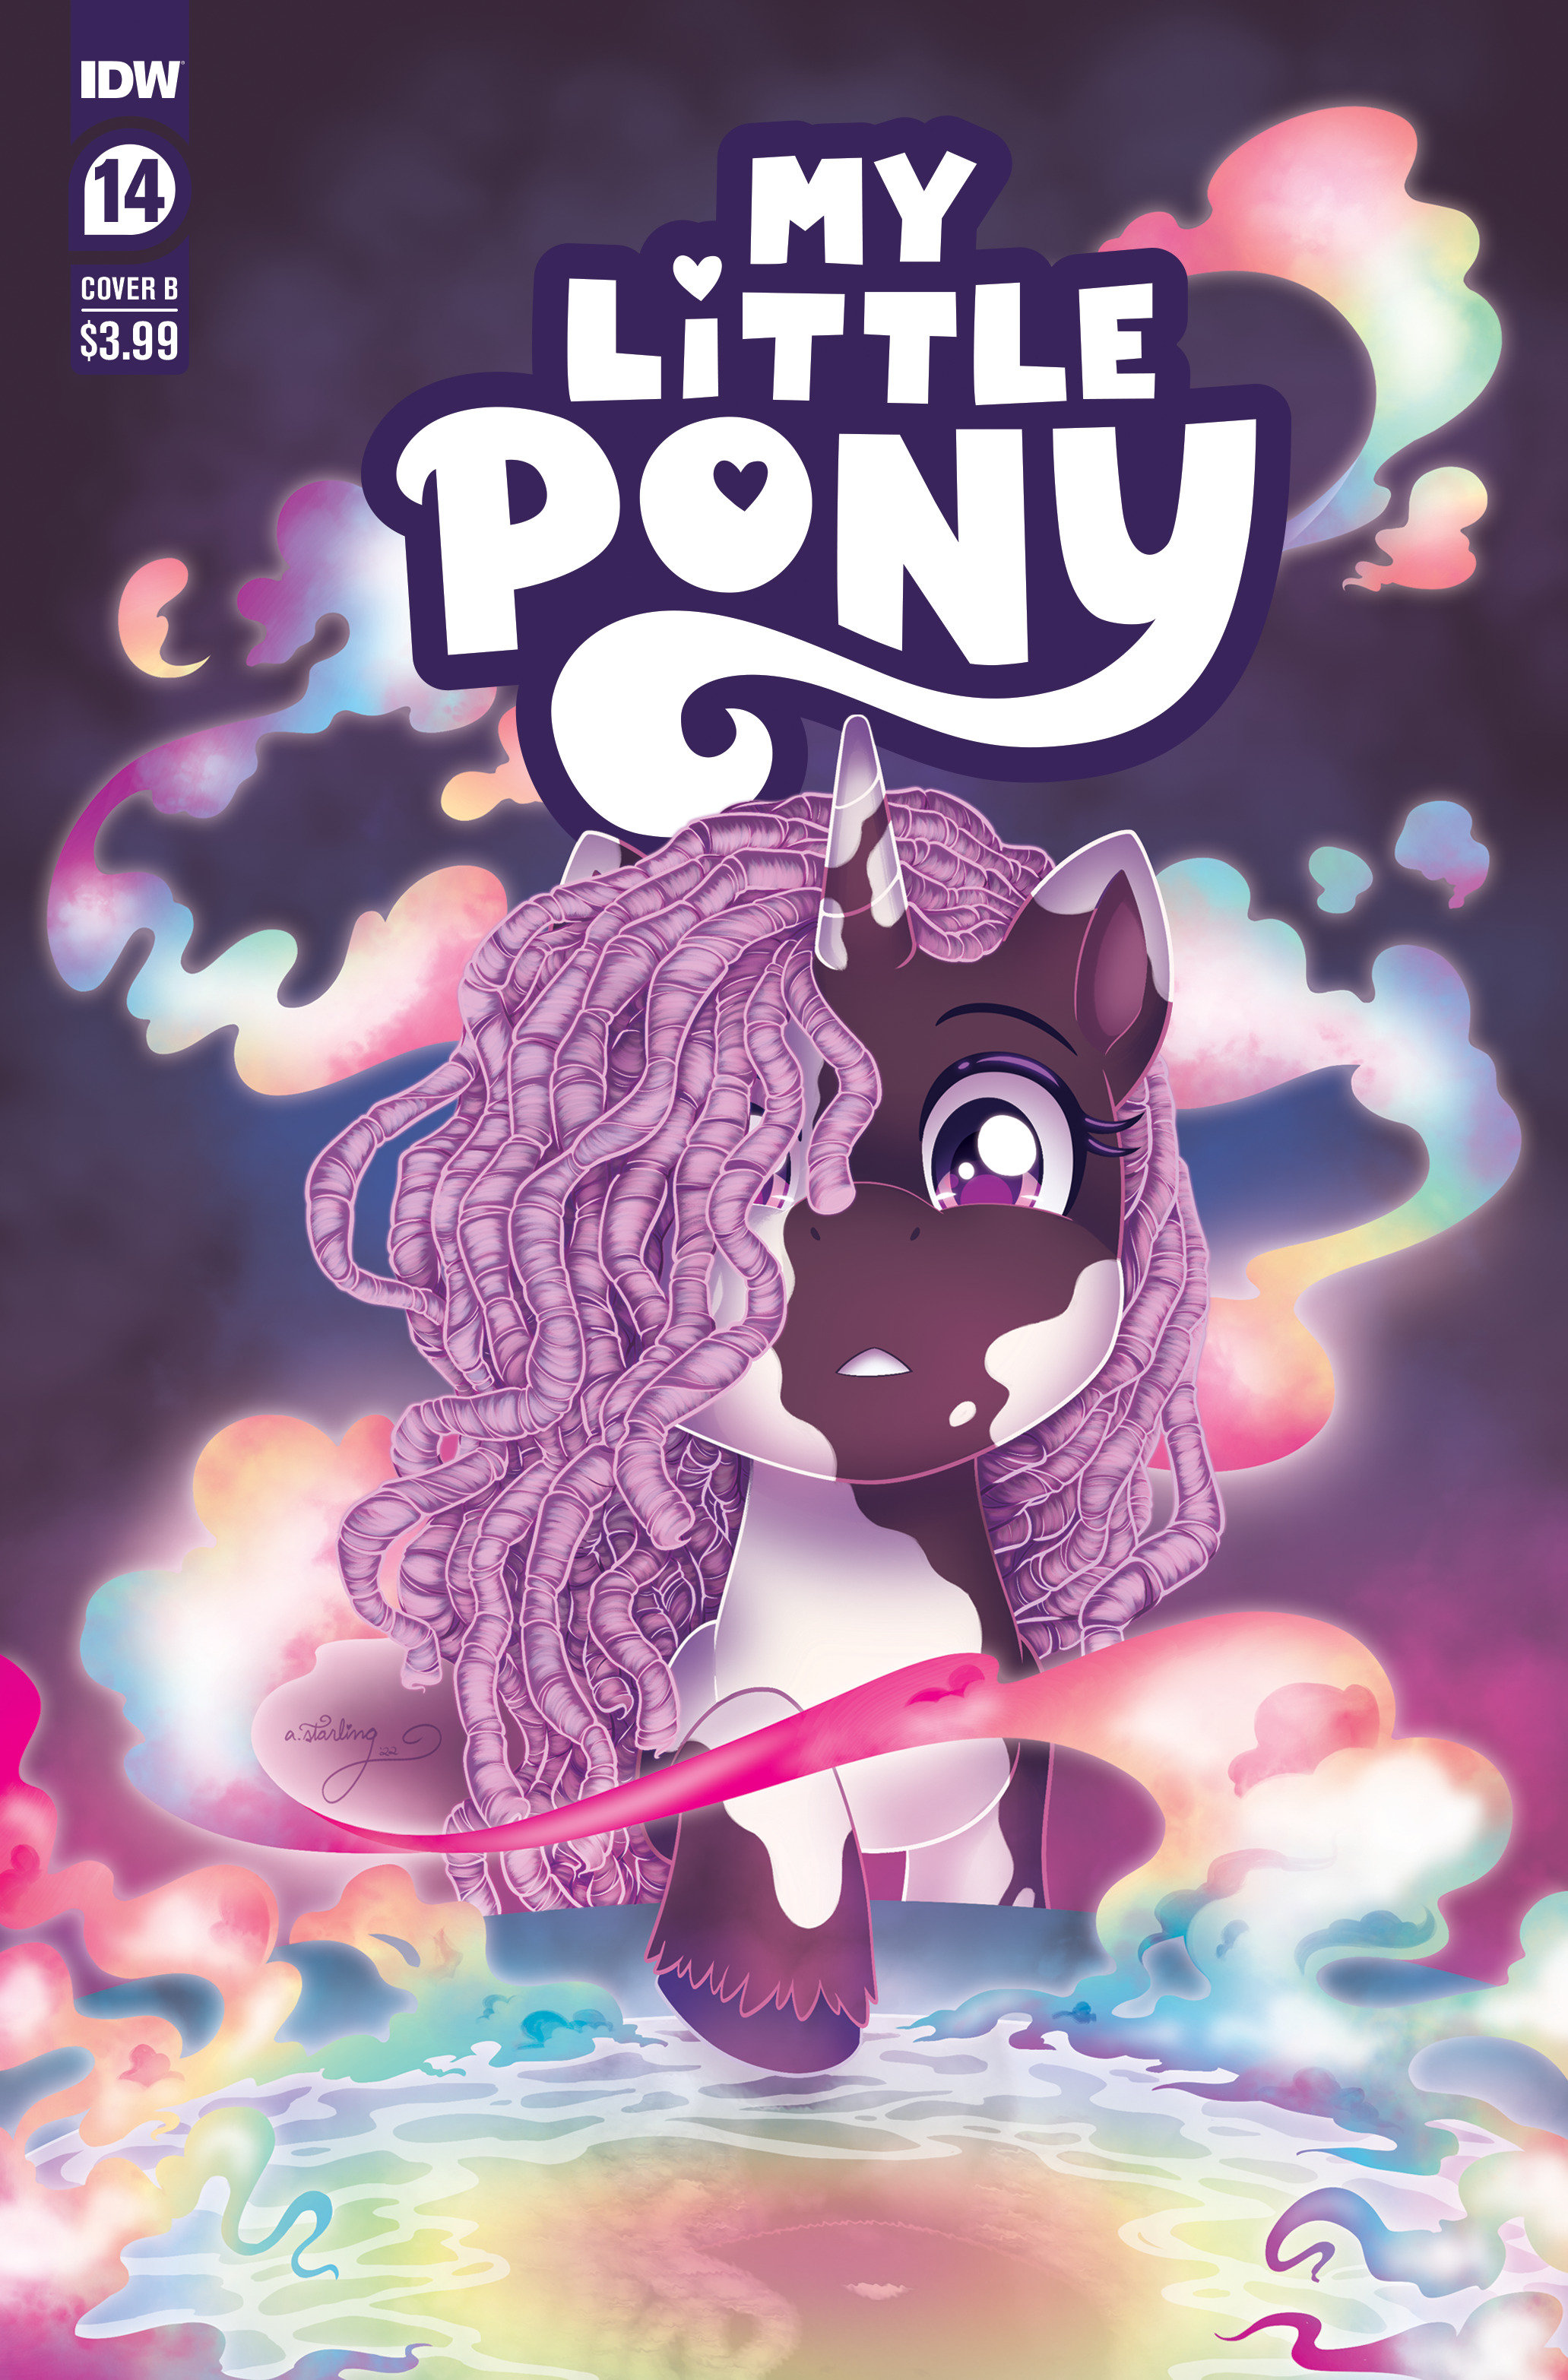 My Little Pony #14 Cover B Starling